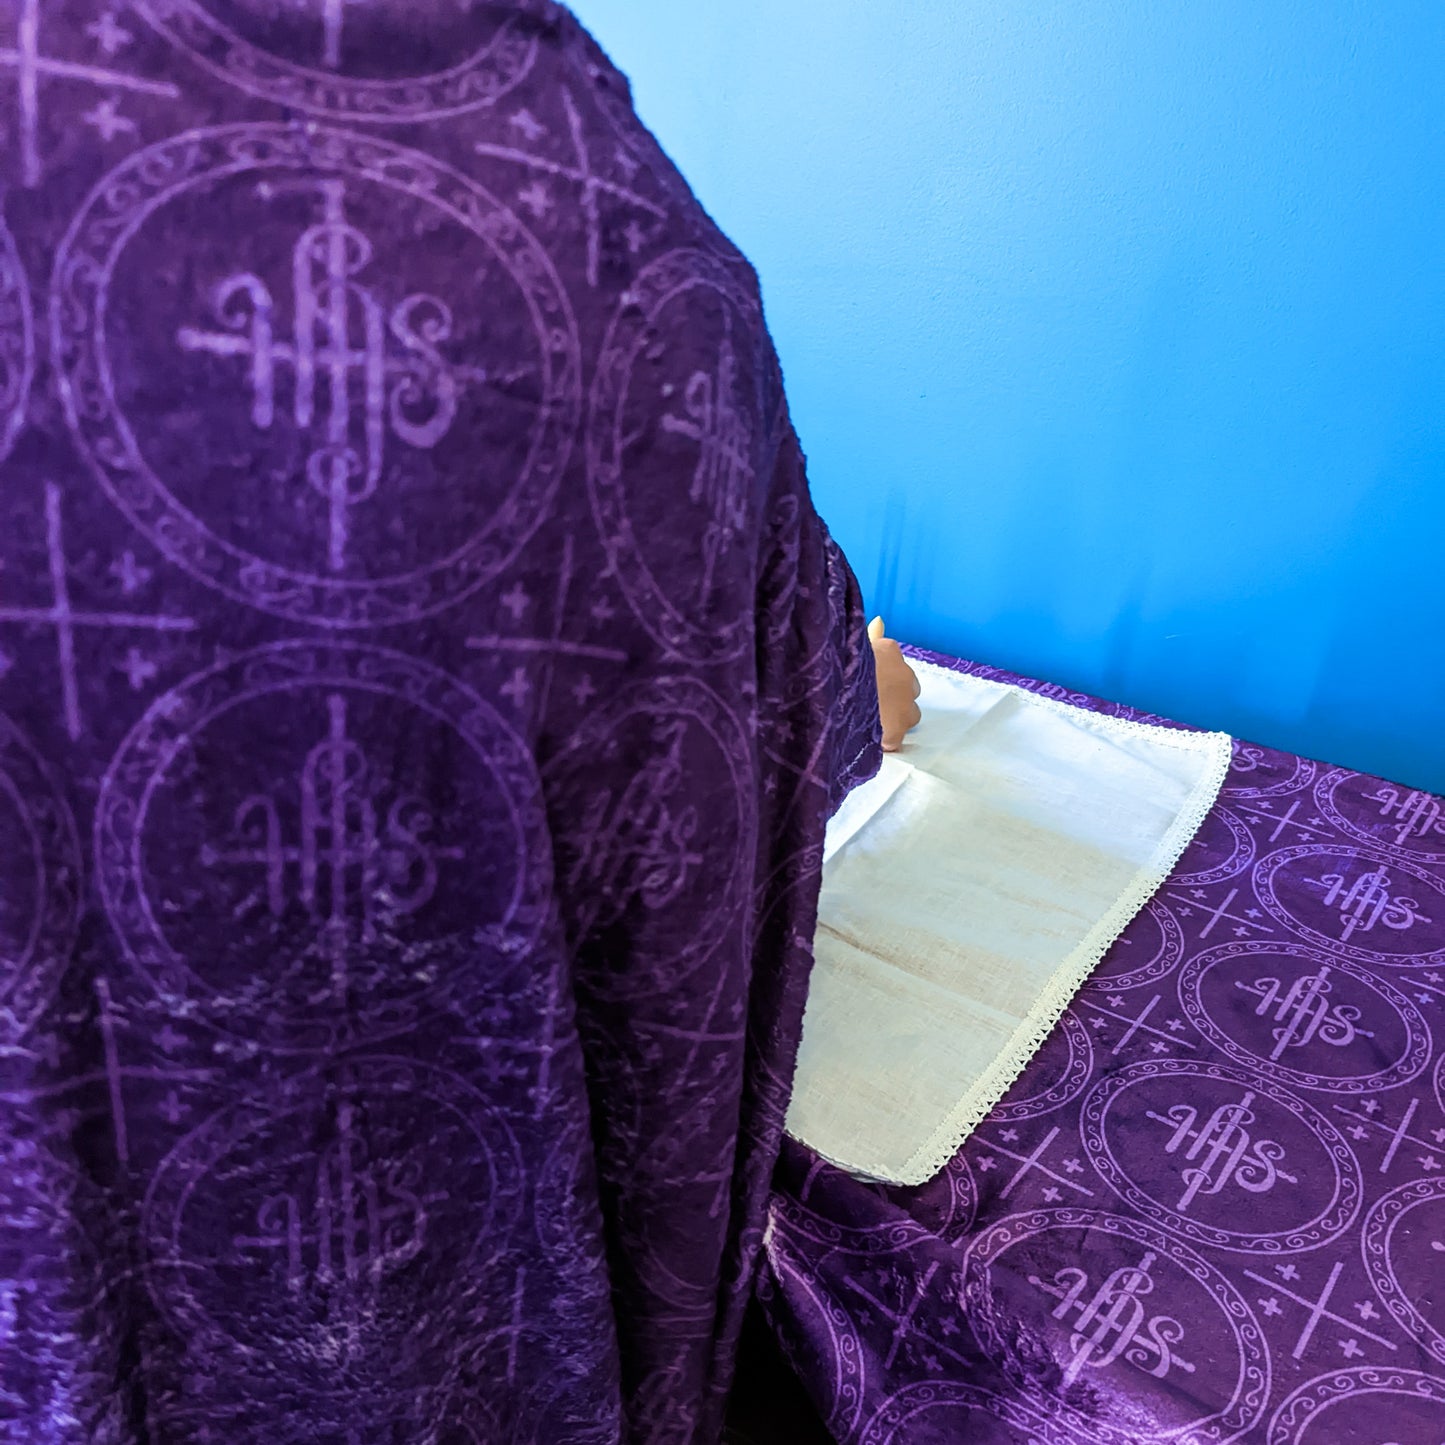 Purple and Red IHS Altar Cloth and Vestment Blanket